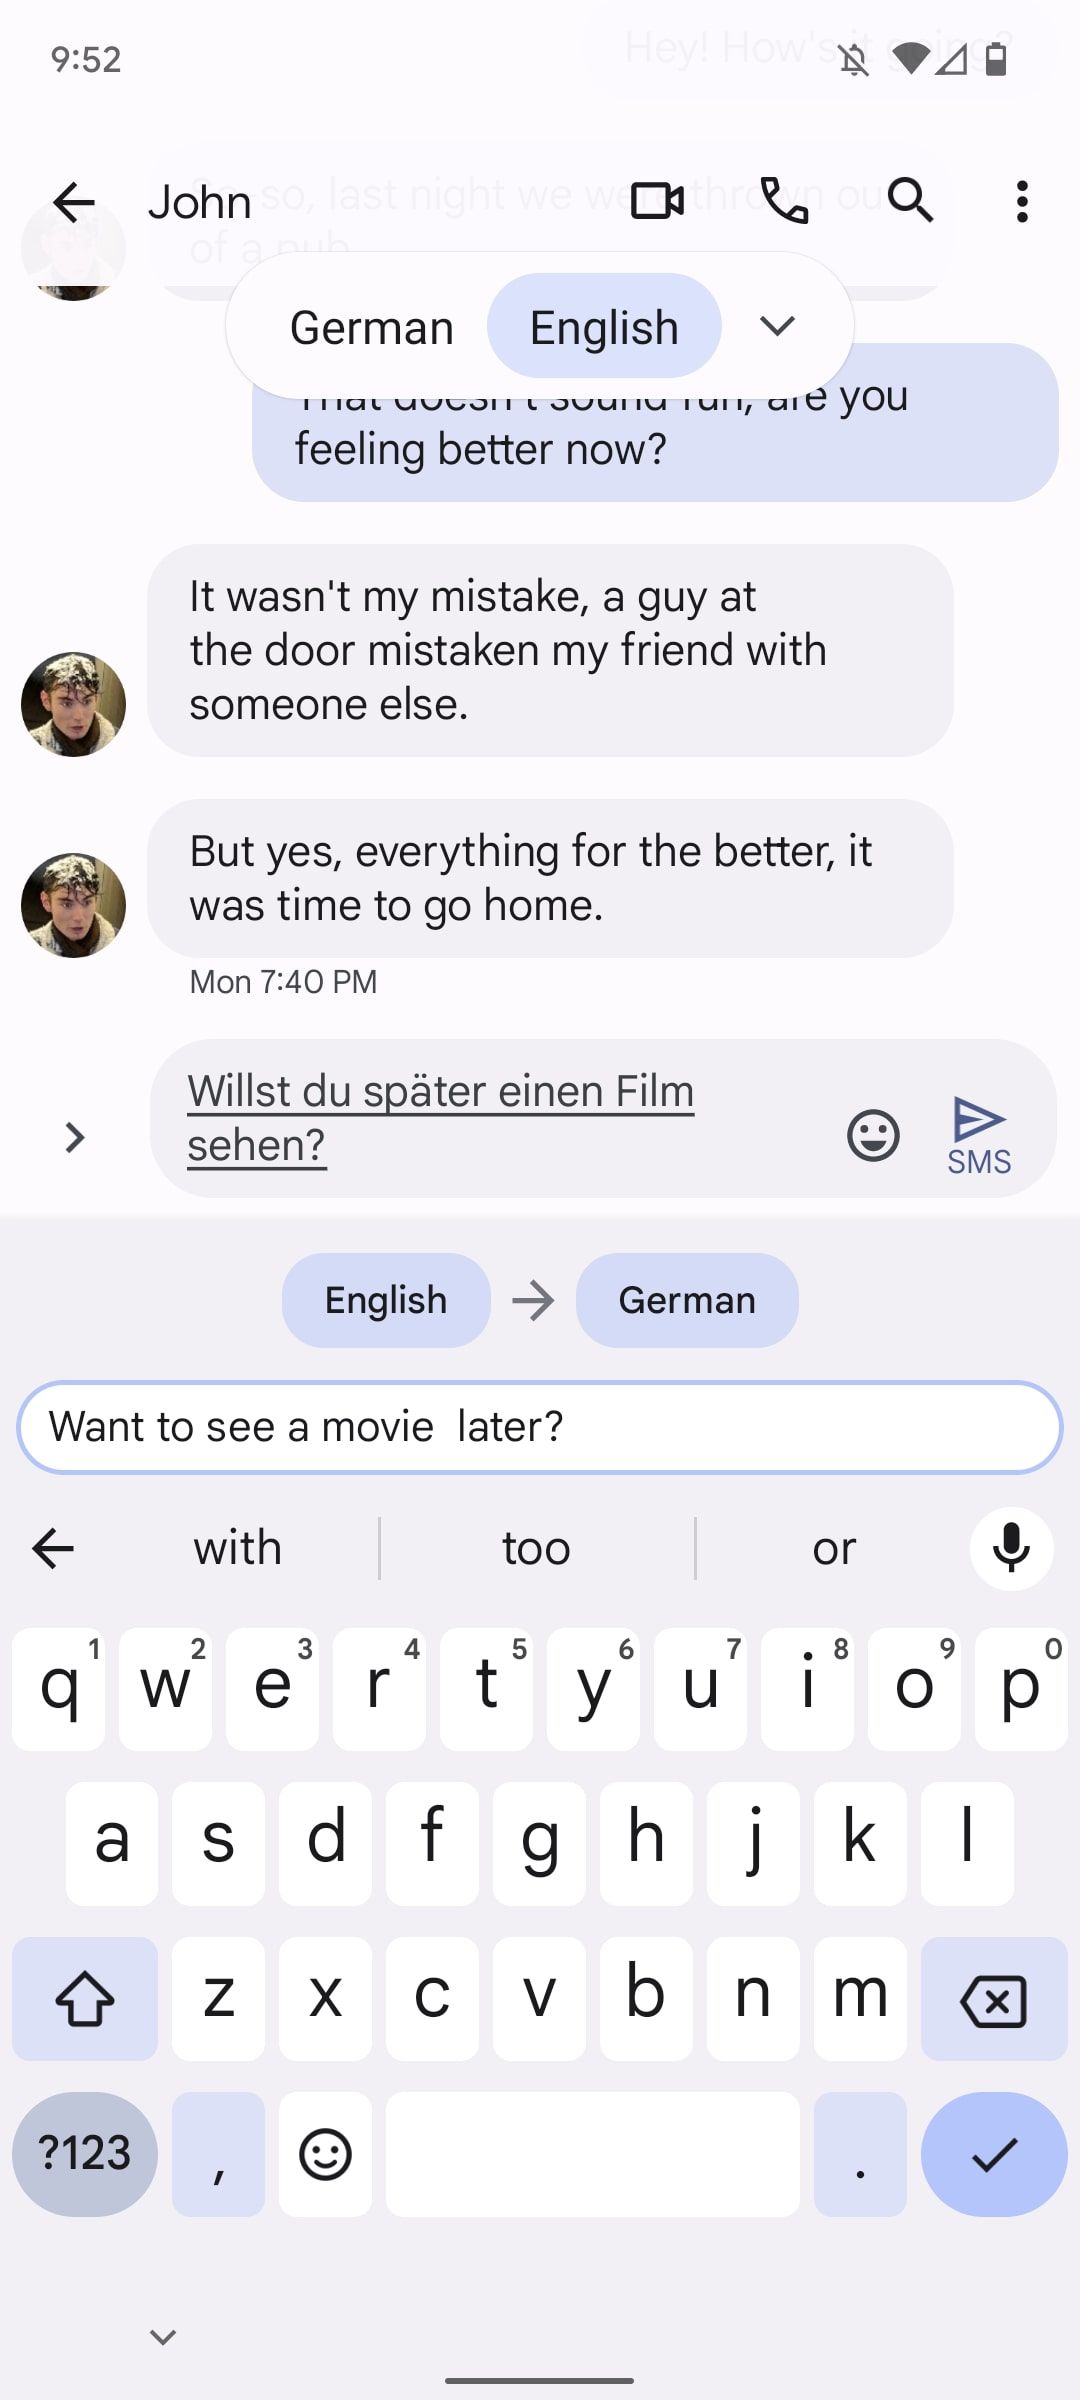 A text message conversation showing a language being translanted from English to German.